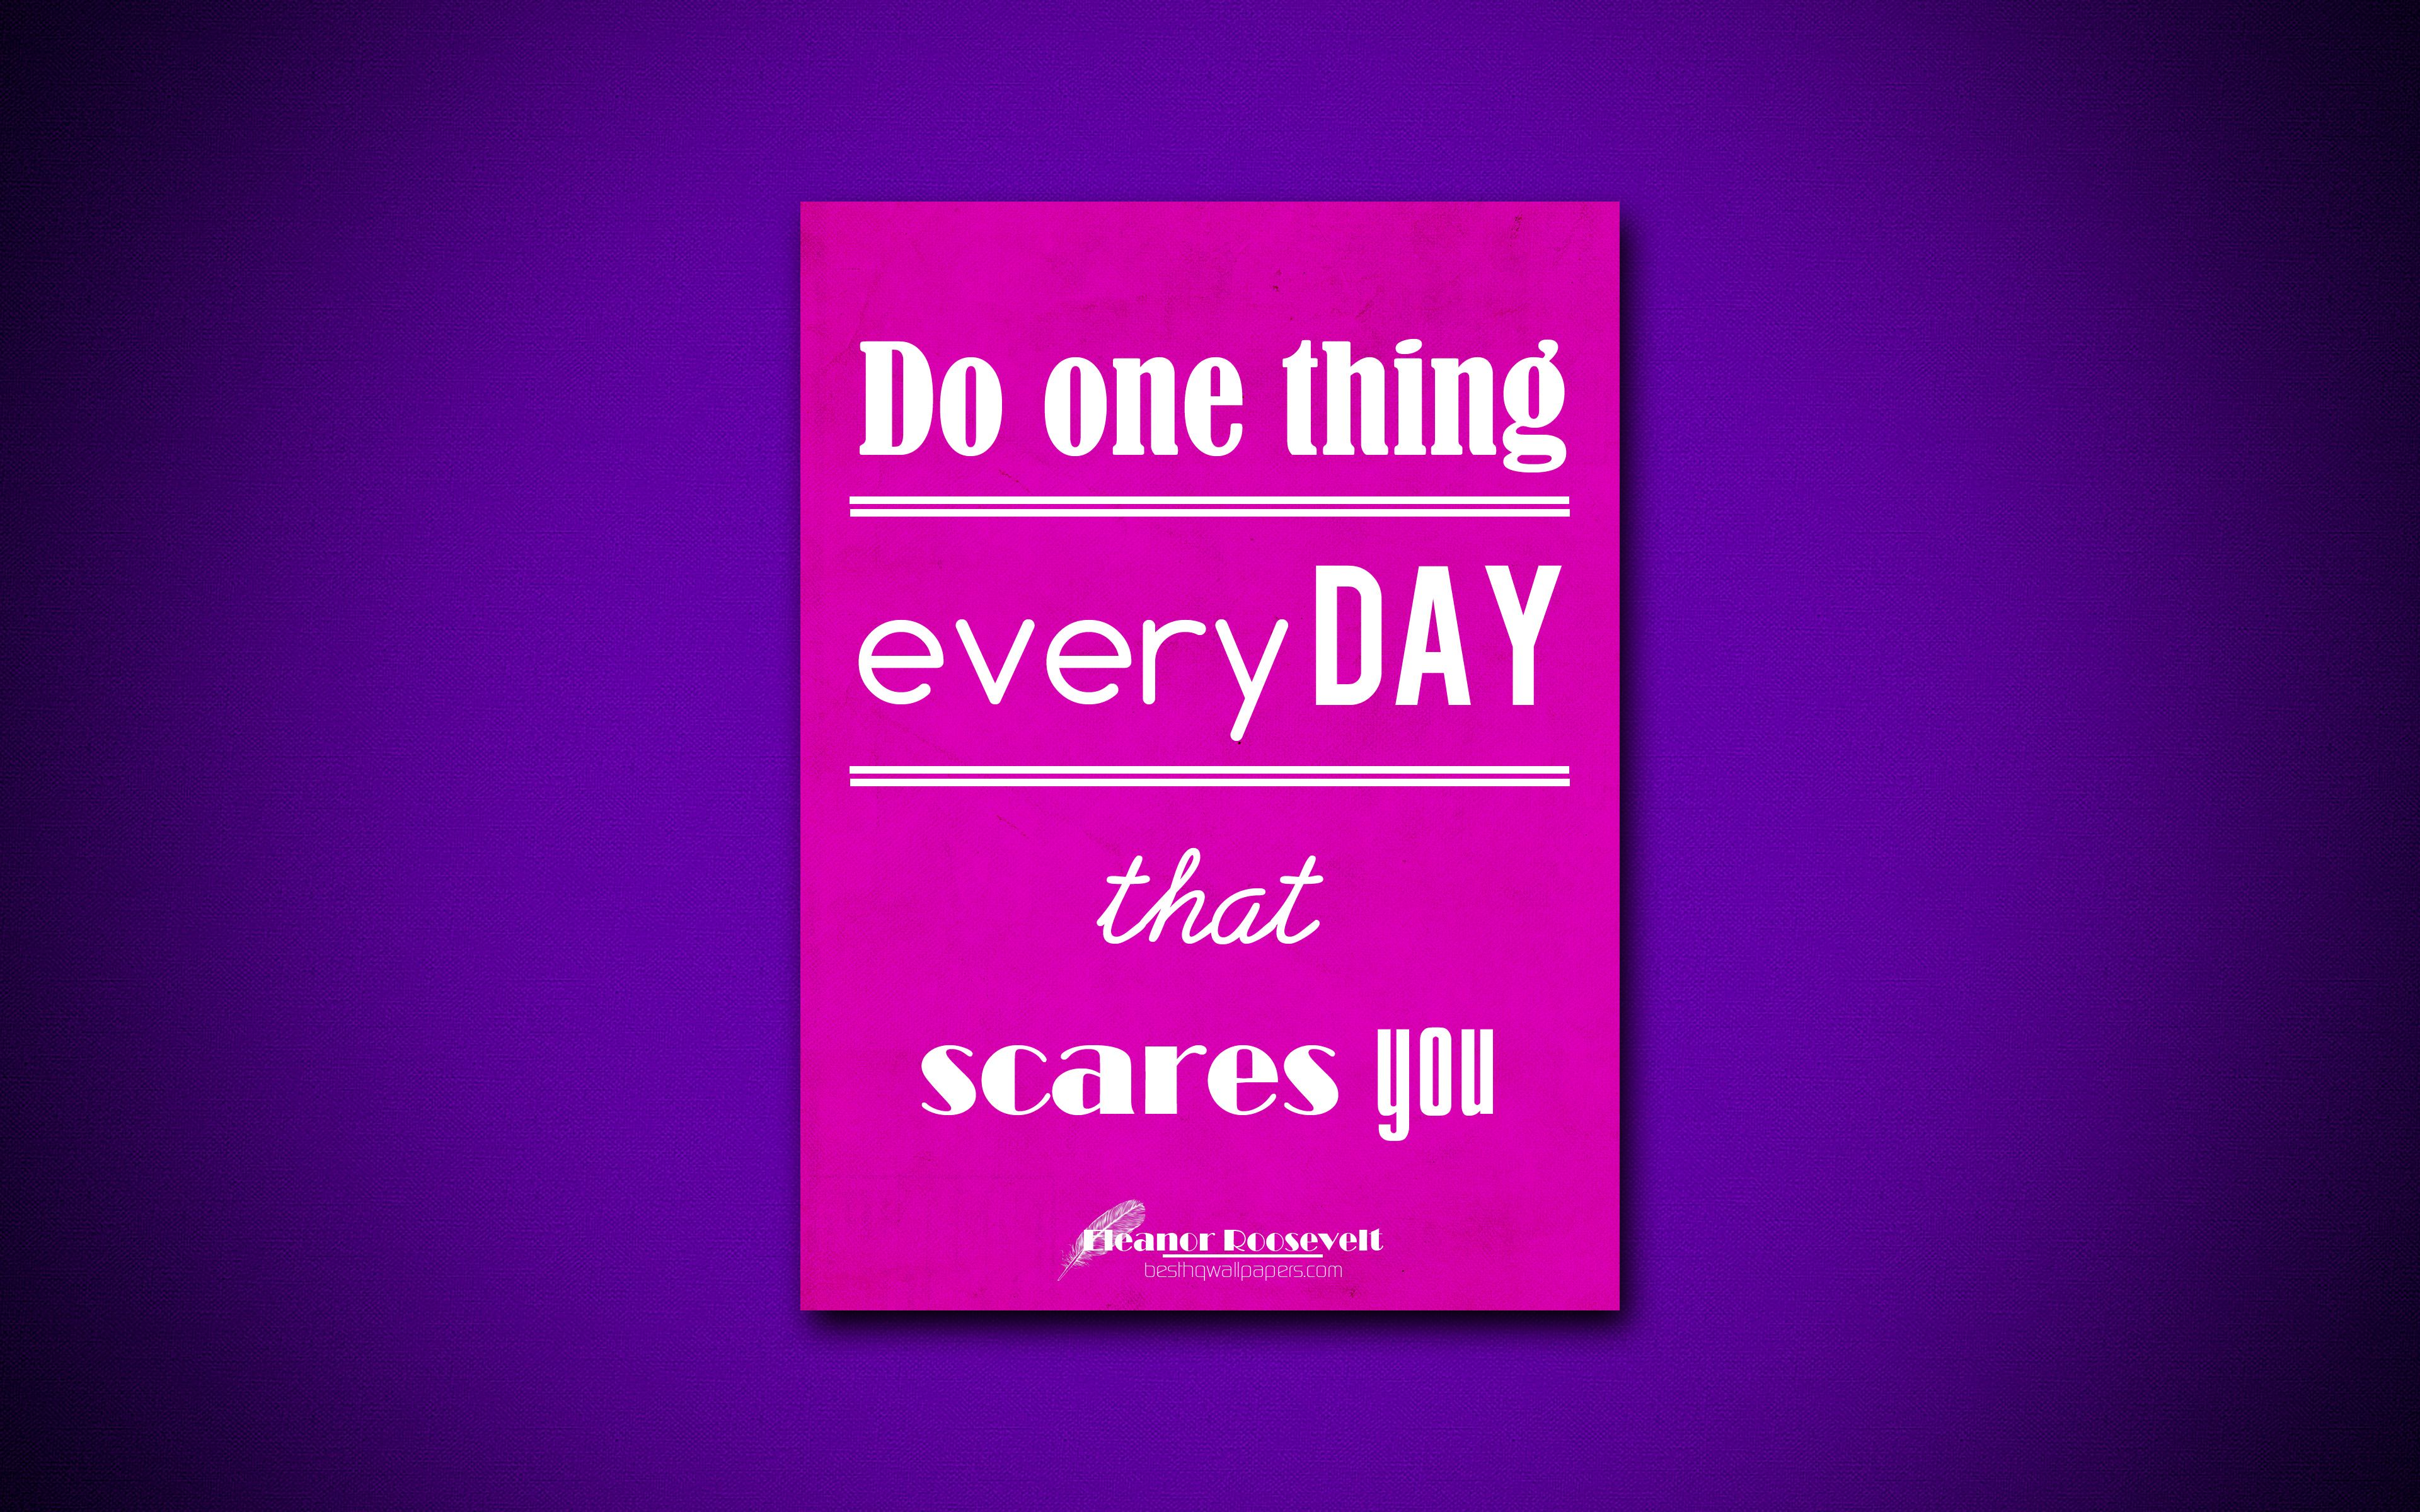 Download wallpaper 4k, Do one thing every day that scares you, quotes about life, Eleanor Roosevelt, motivation, purple paper, inspiration, Eleanor Roosevelt quotes for desktop with resolution 3840x2400. High Quality HD picture